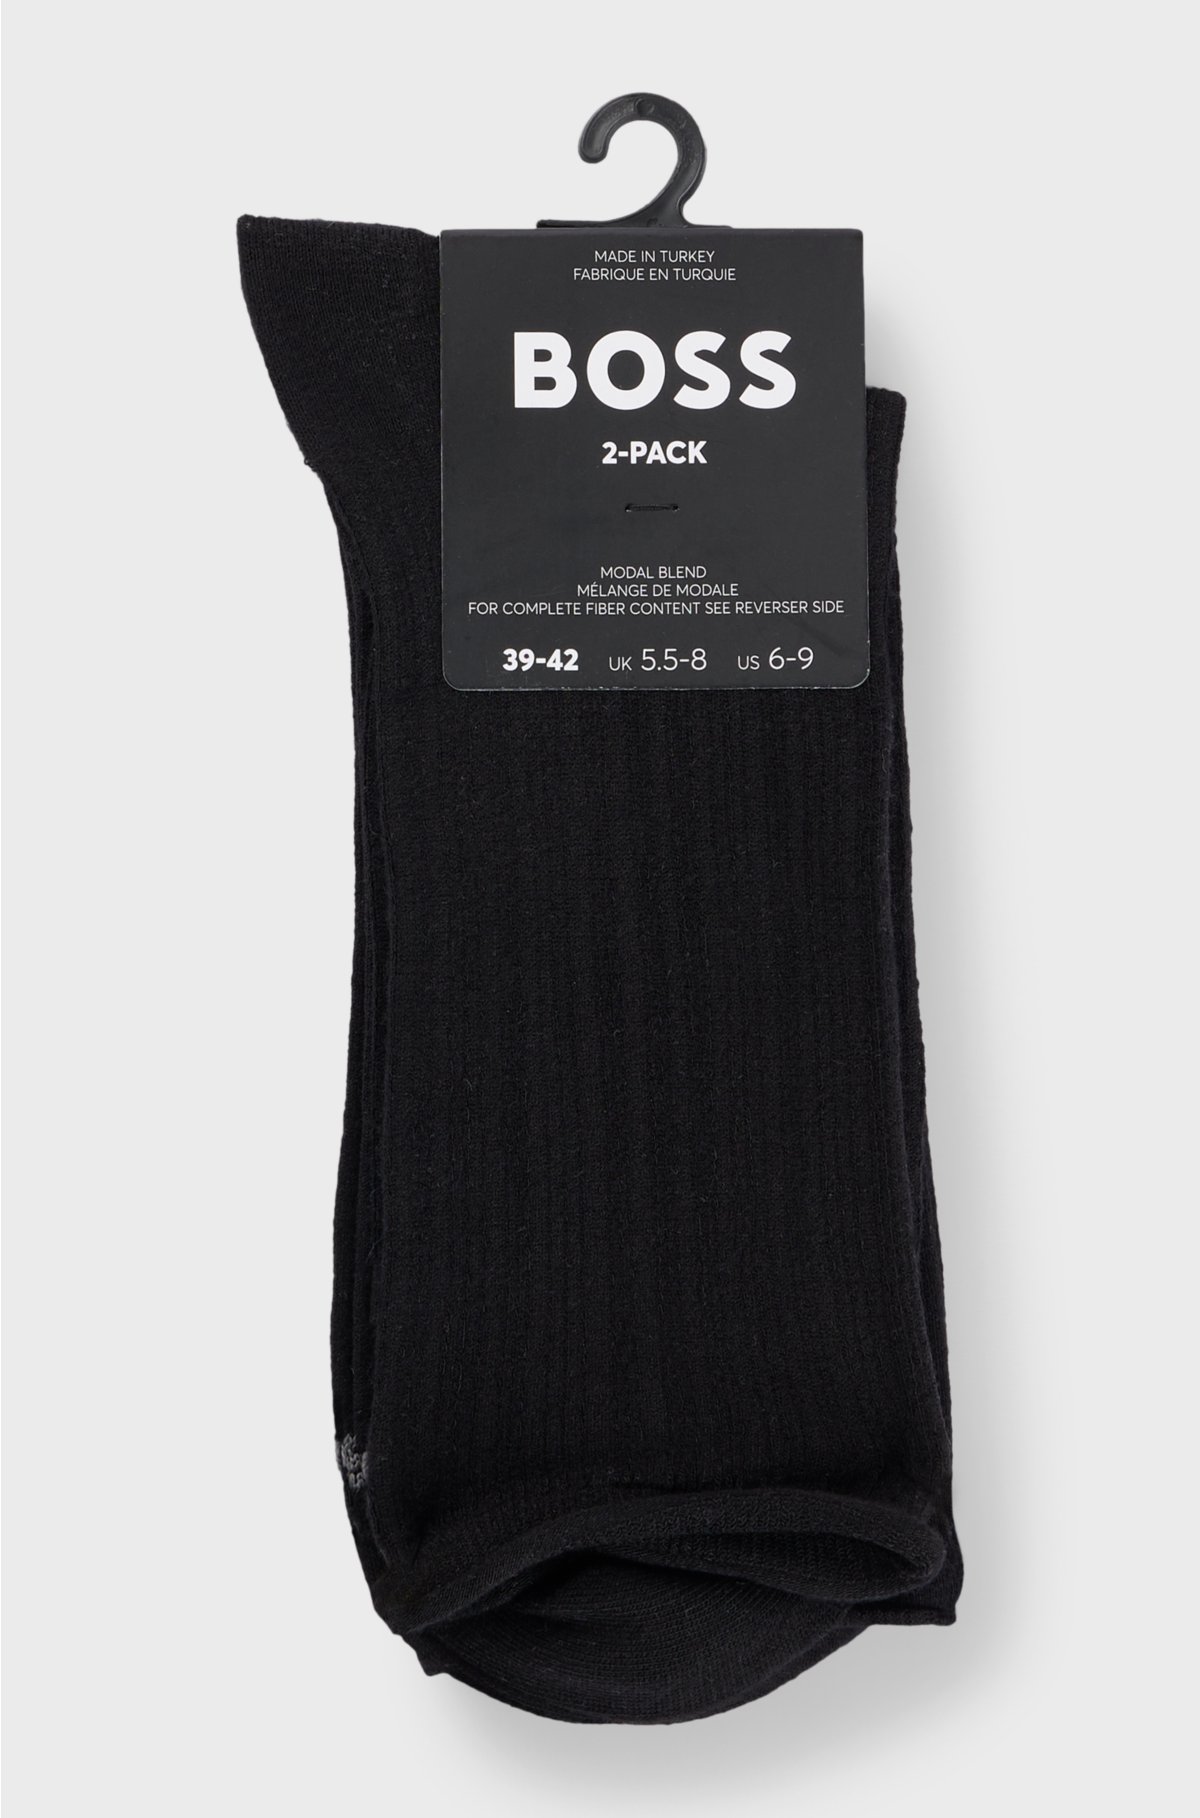 Two-pack of short-length socks in stretch yarns, Black